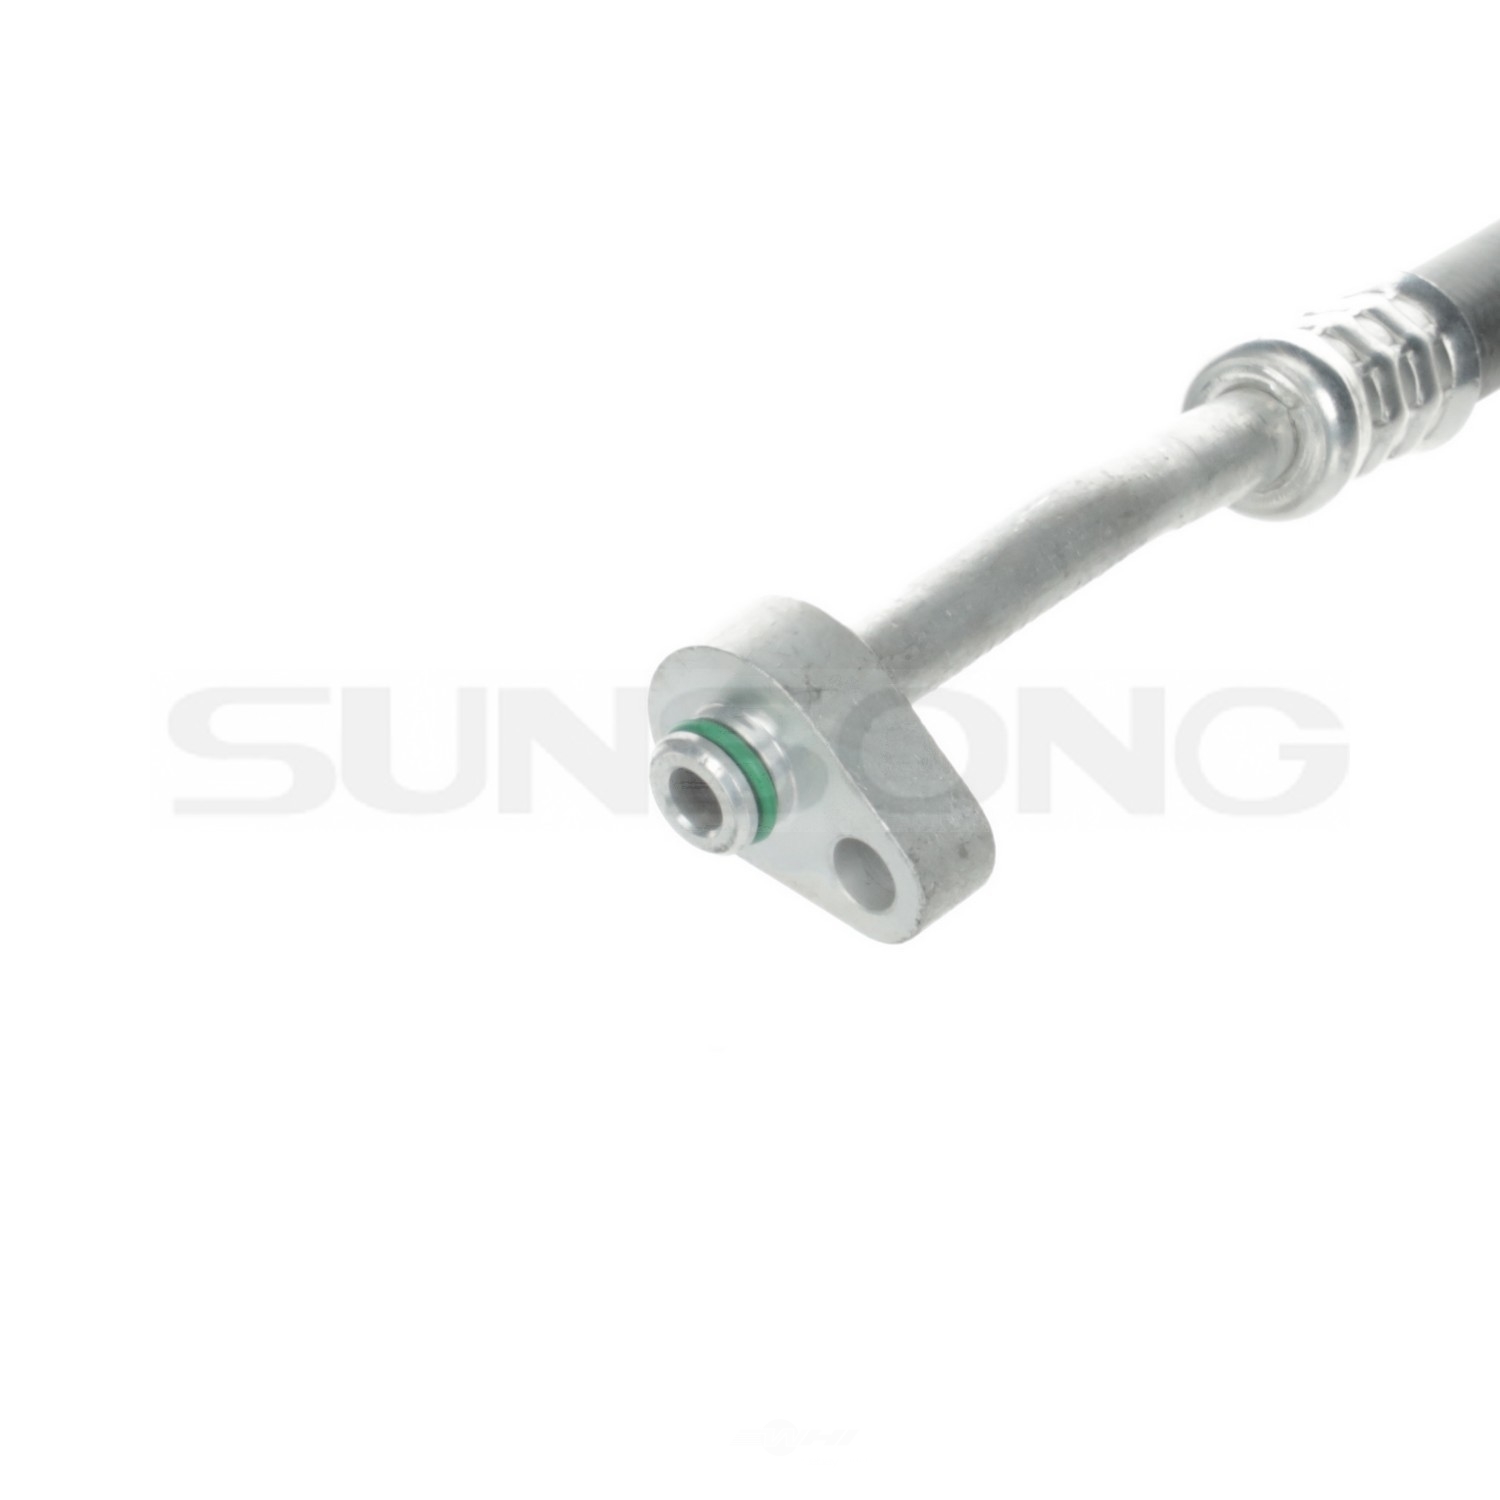 SUNSONG NORTH AMERICA - A/C Refrigerant Discharge / Suction Hose Assembly - SUG 5204030